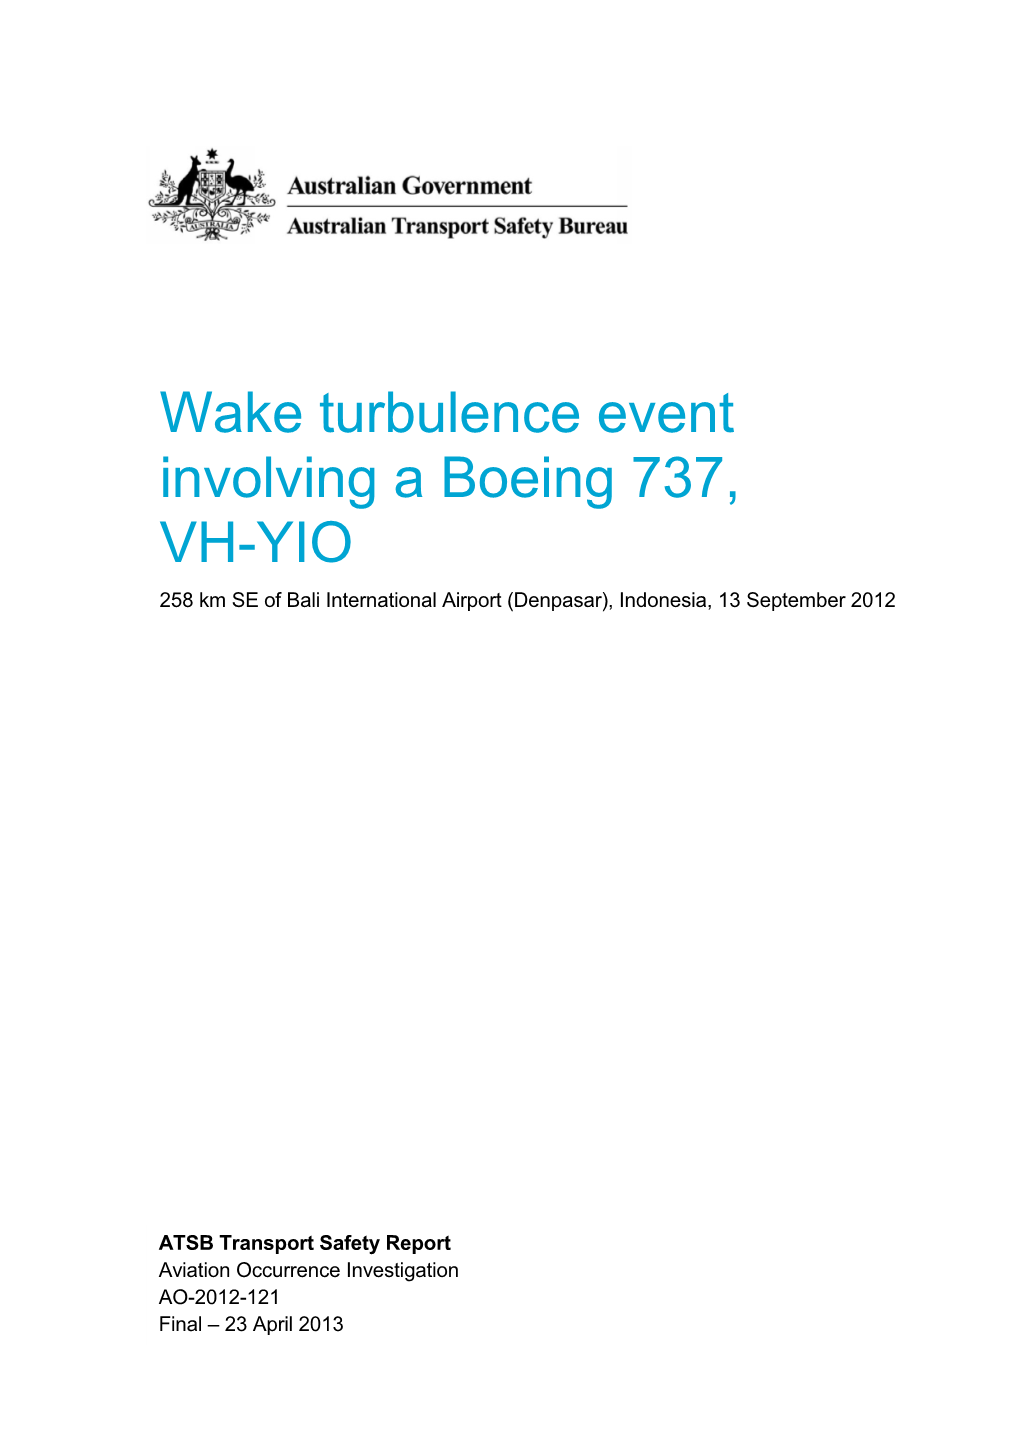 Wake Turbulence Event Involving a Boeing 737, VH-YIO